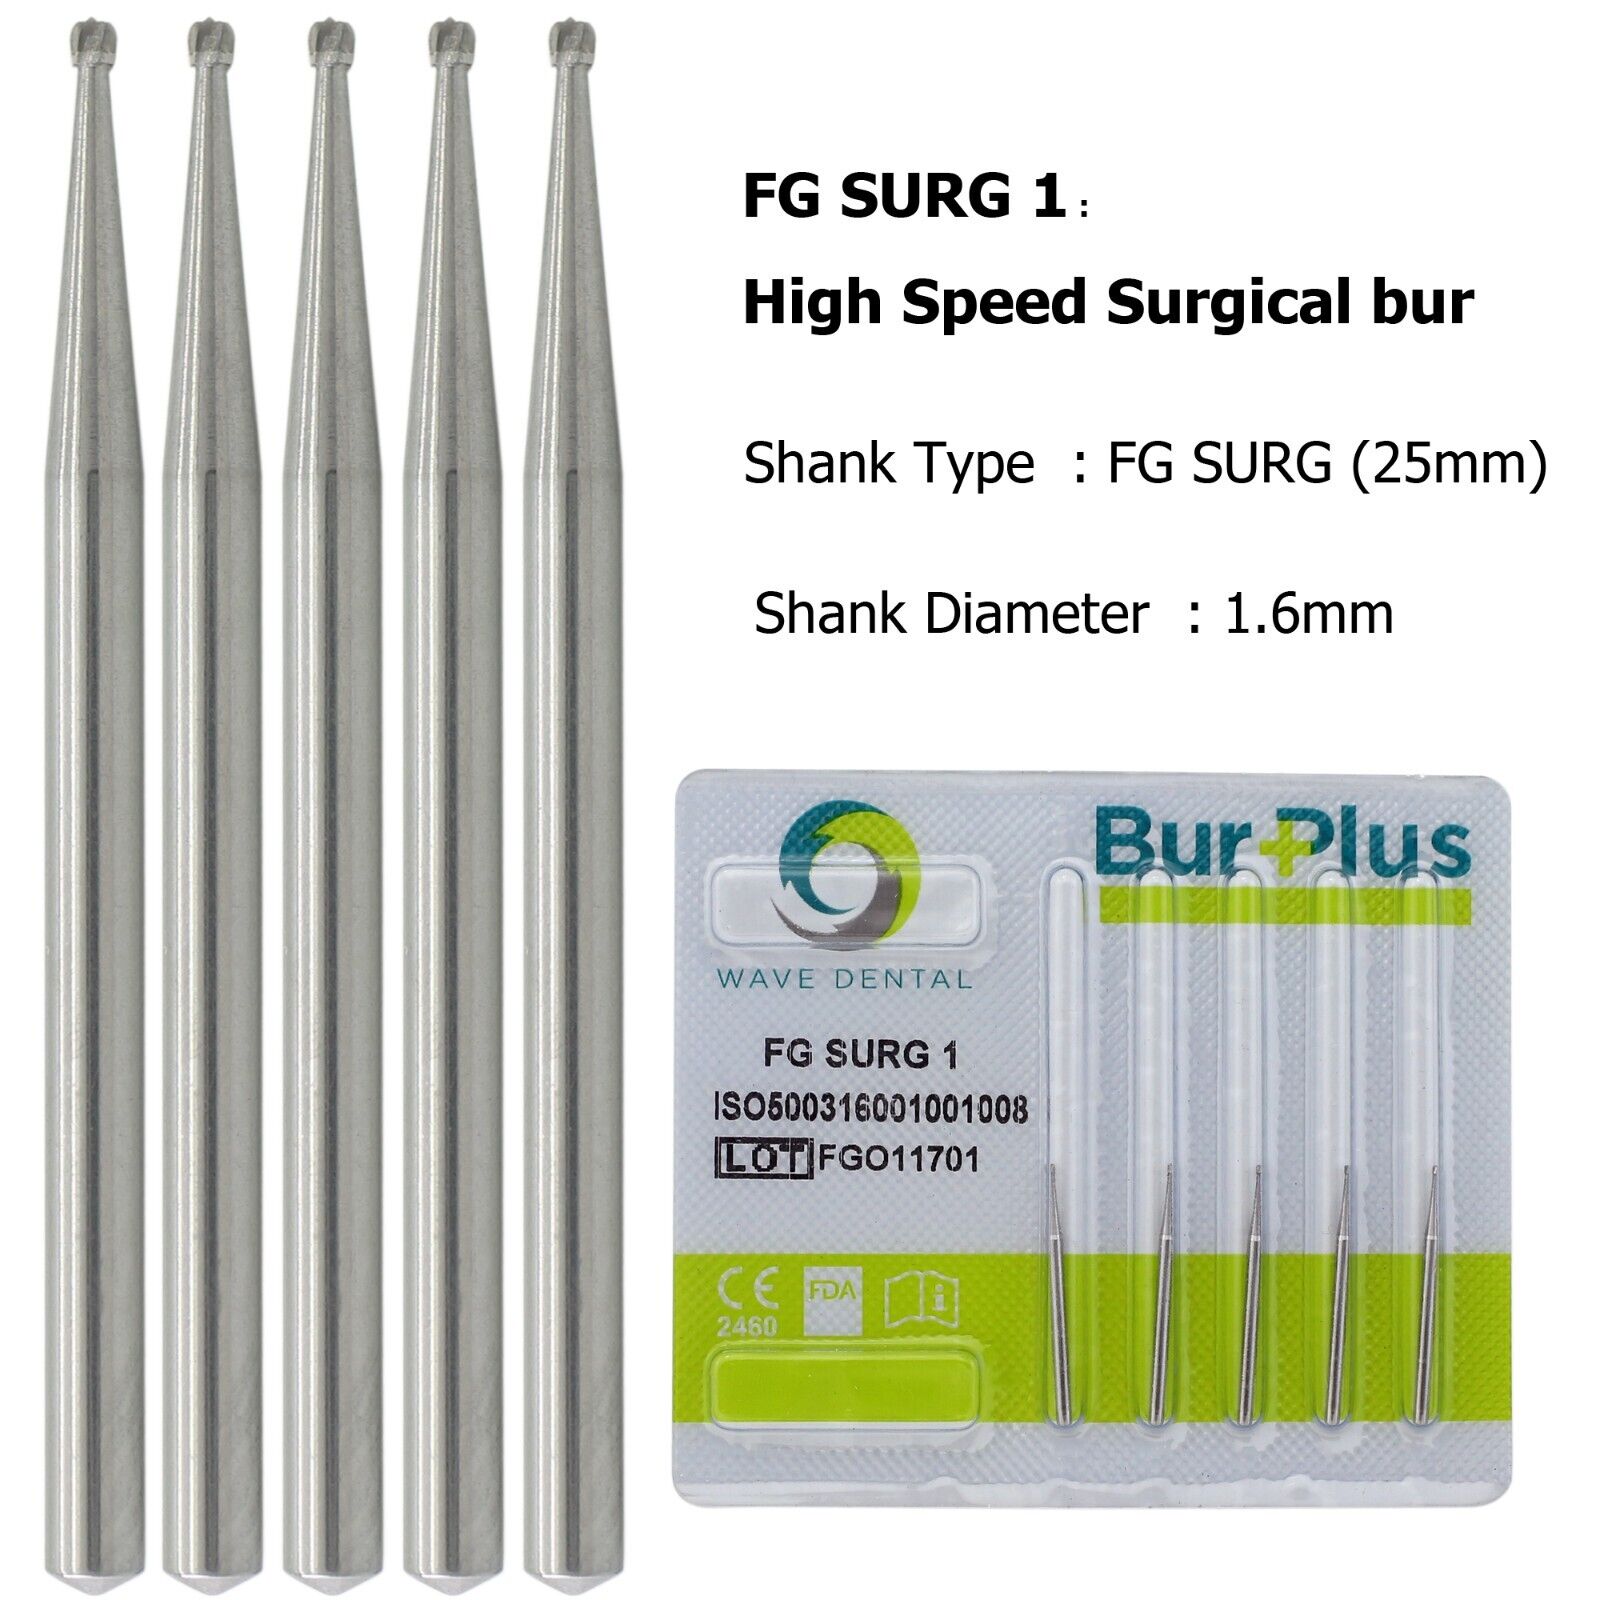 Wave Dental Oral Surgical Bur Tungsten Carbide Midwest Friction Grip FGOS 25mm